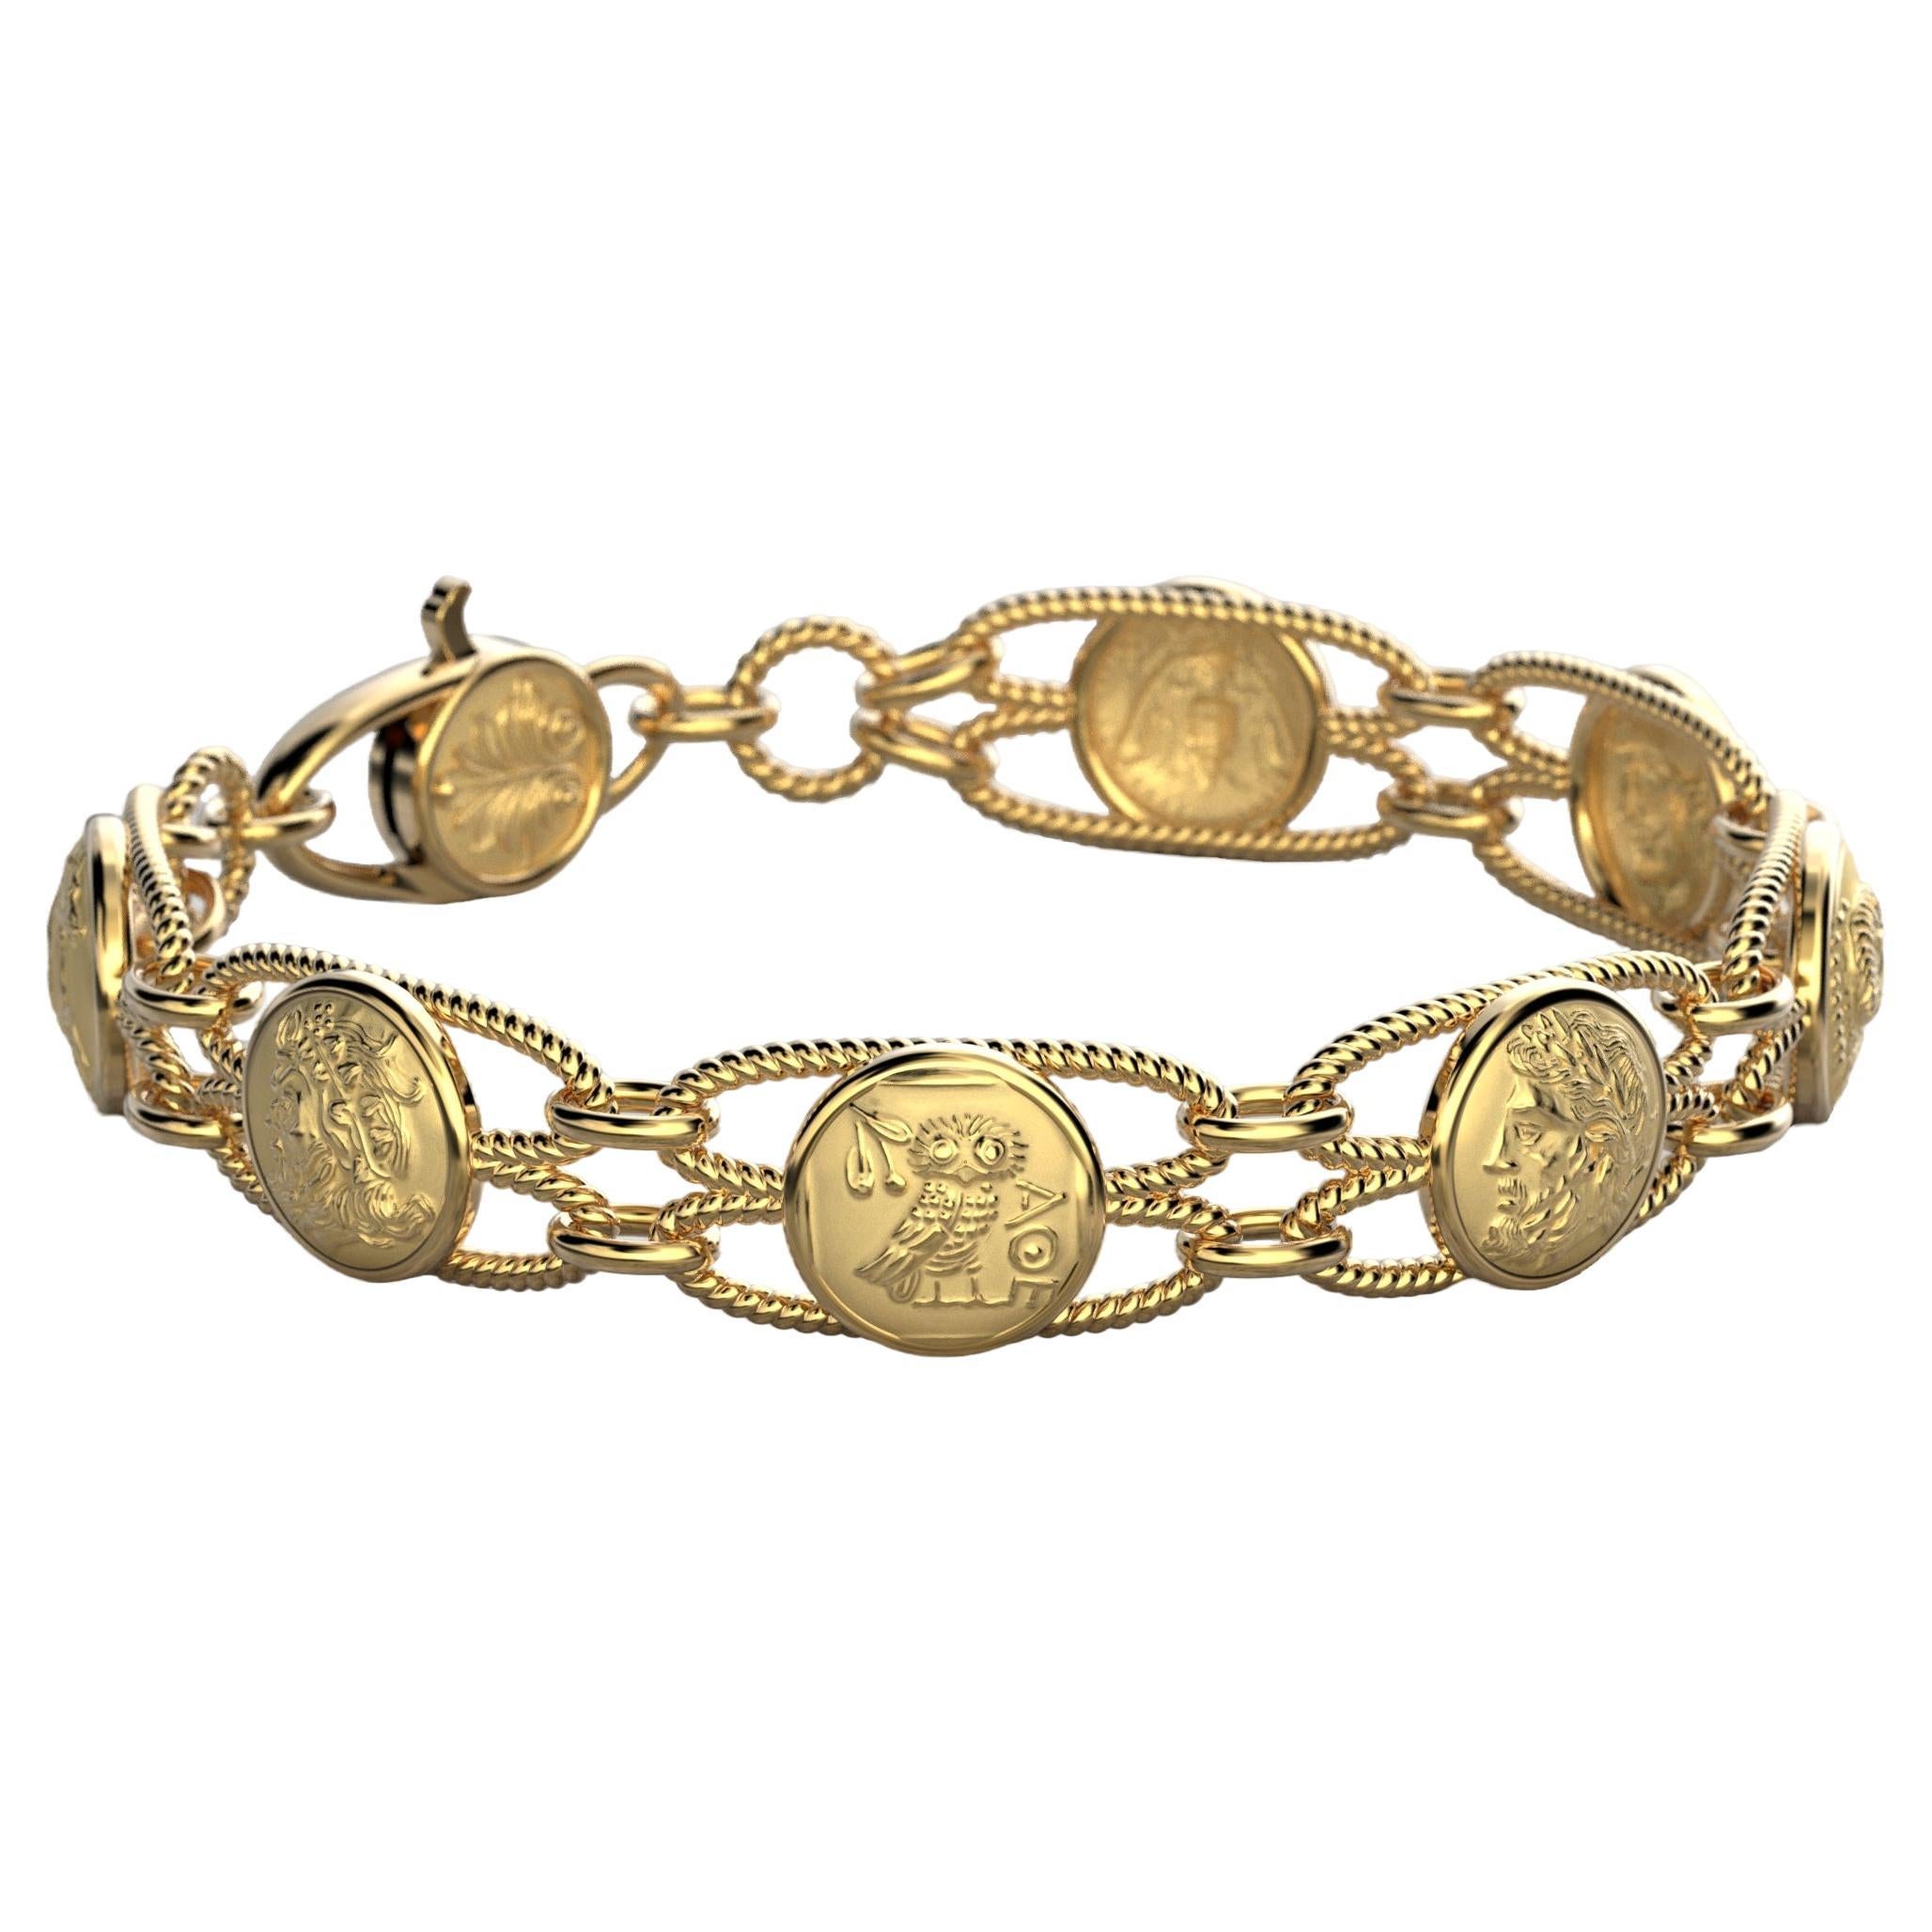 Italian Bracelet in 14k Gold Made in Italy by Oltremare Gioielli, Greek Style